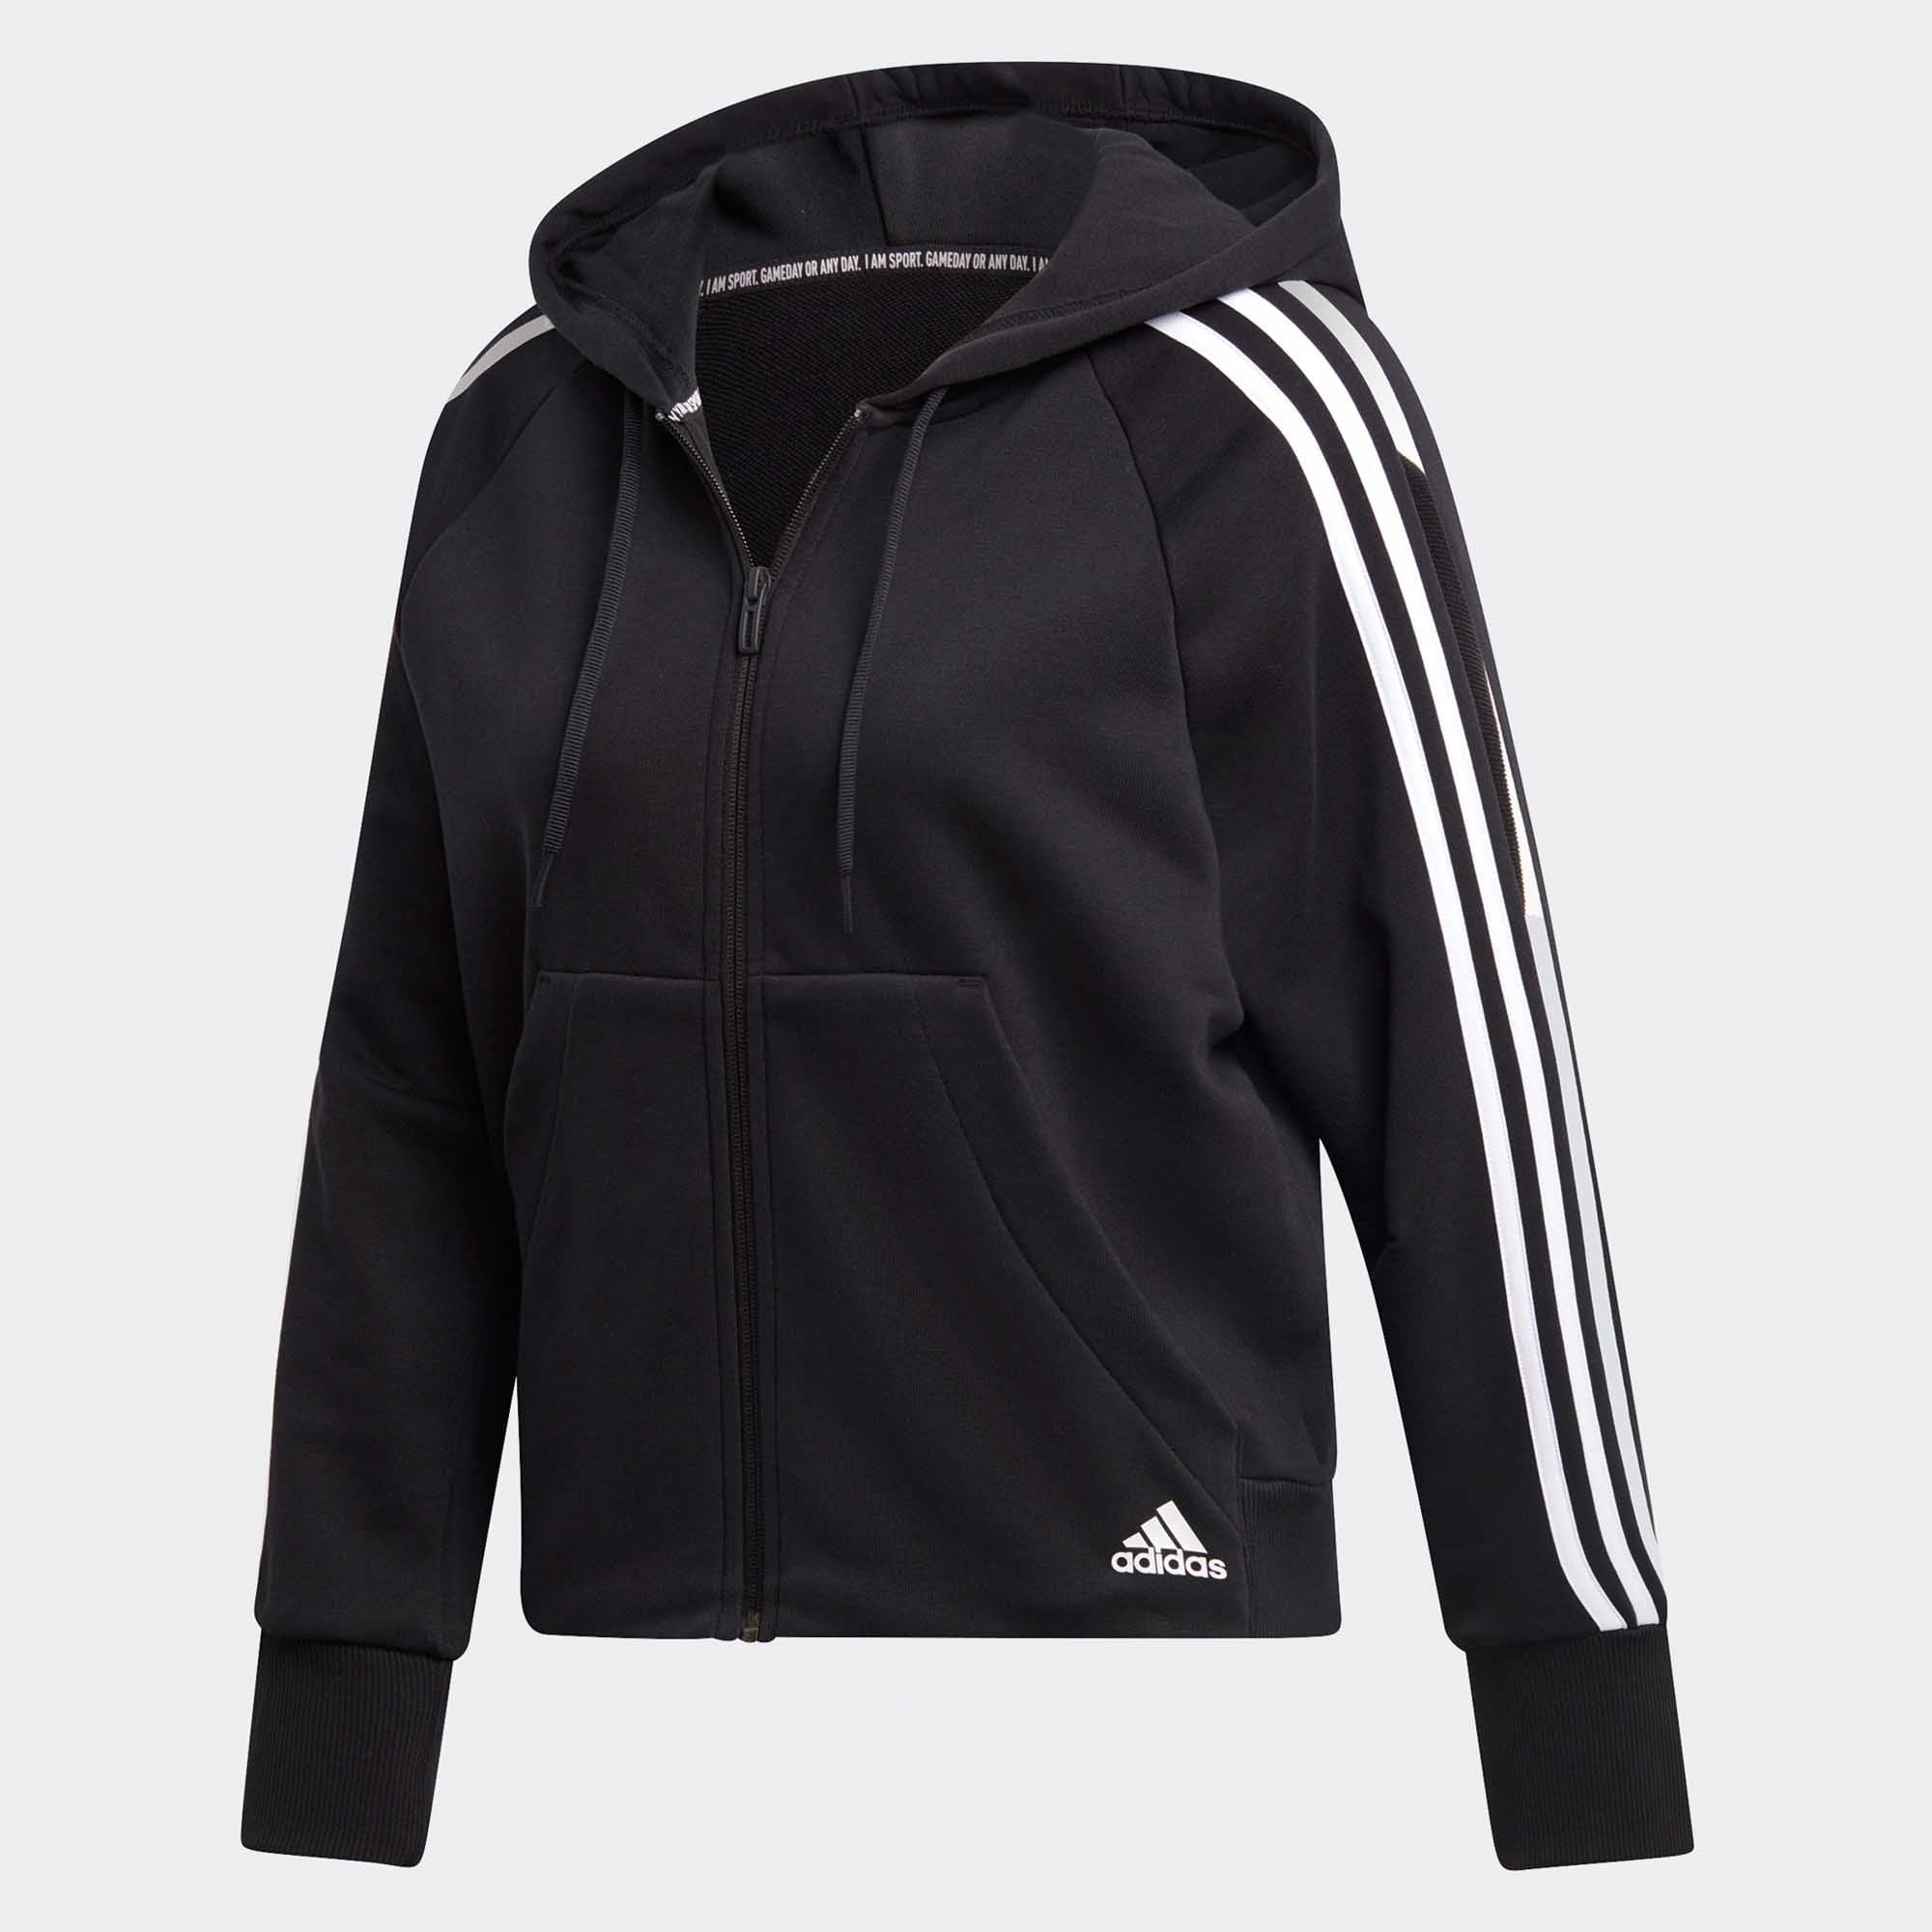 adidas i am sport gameday or any day hoodie